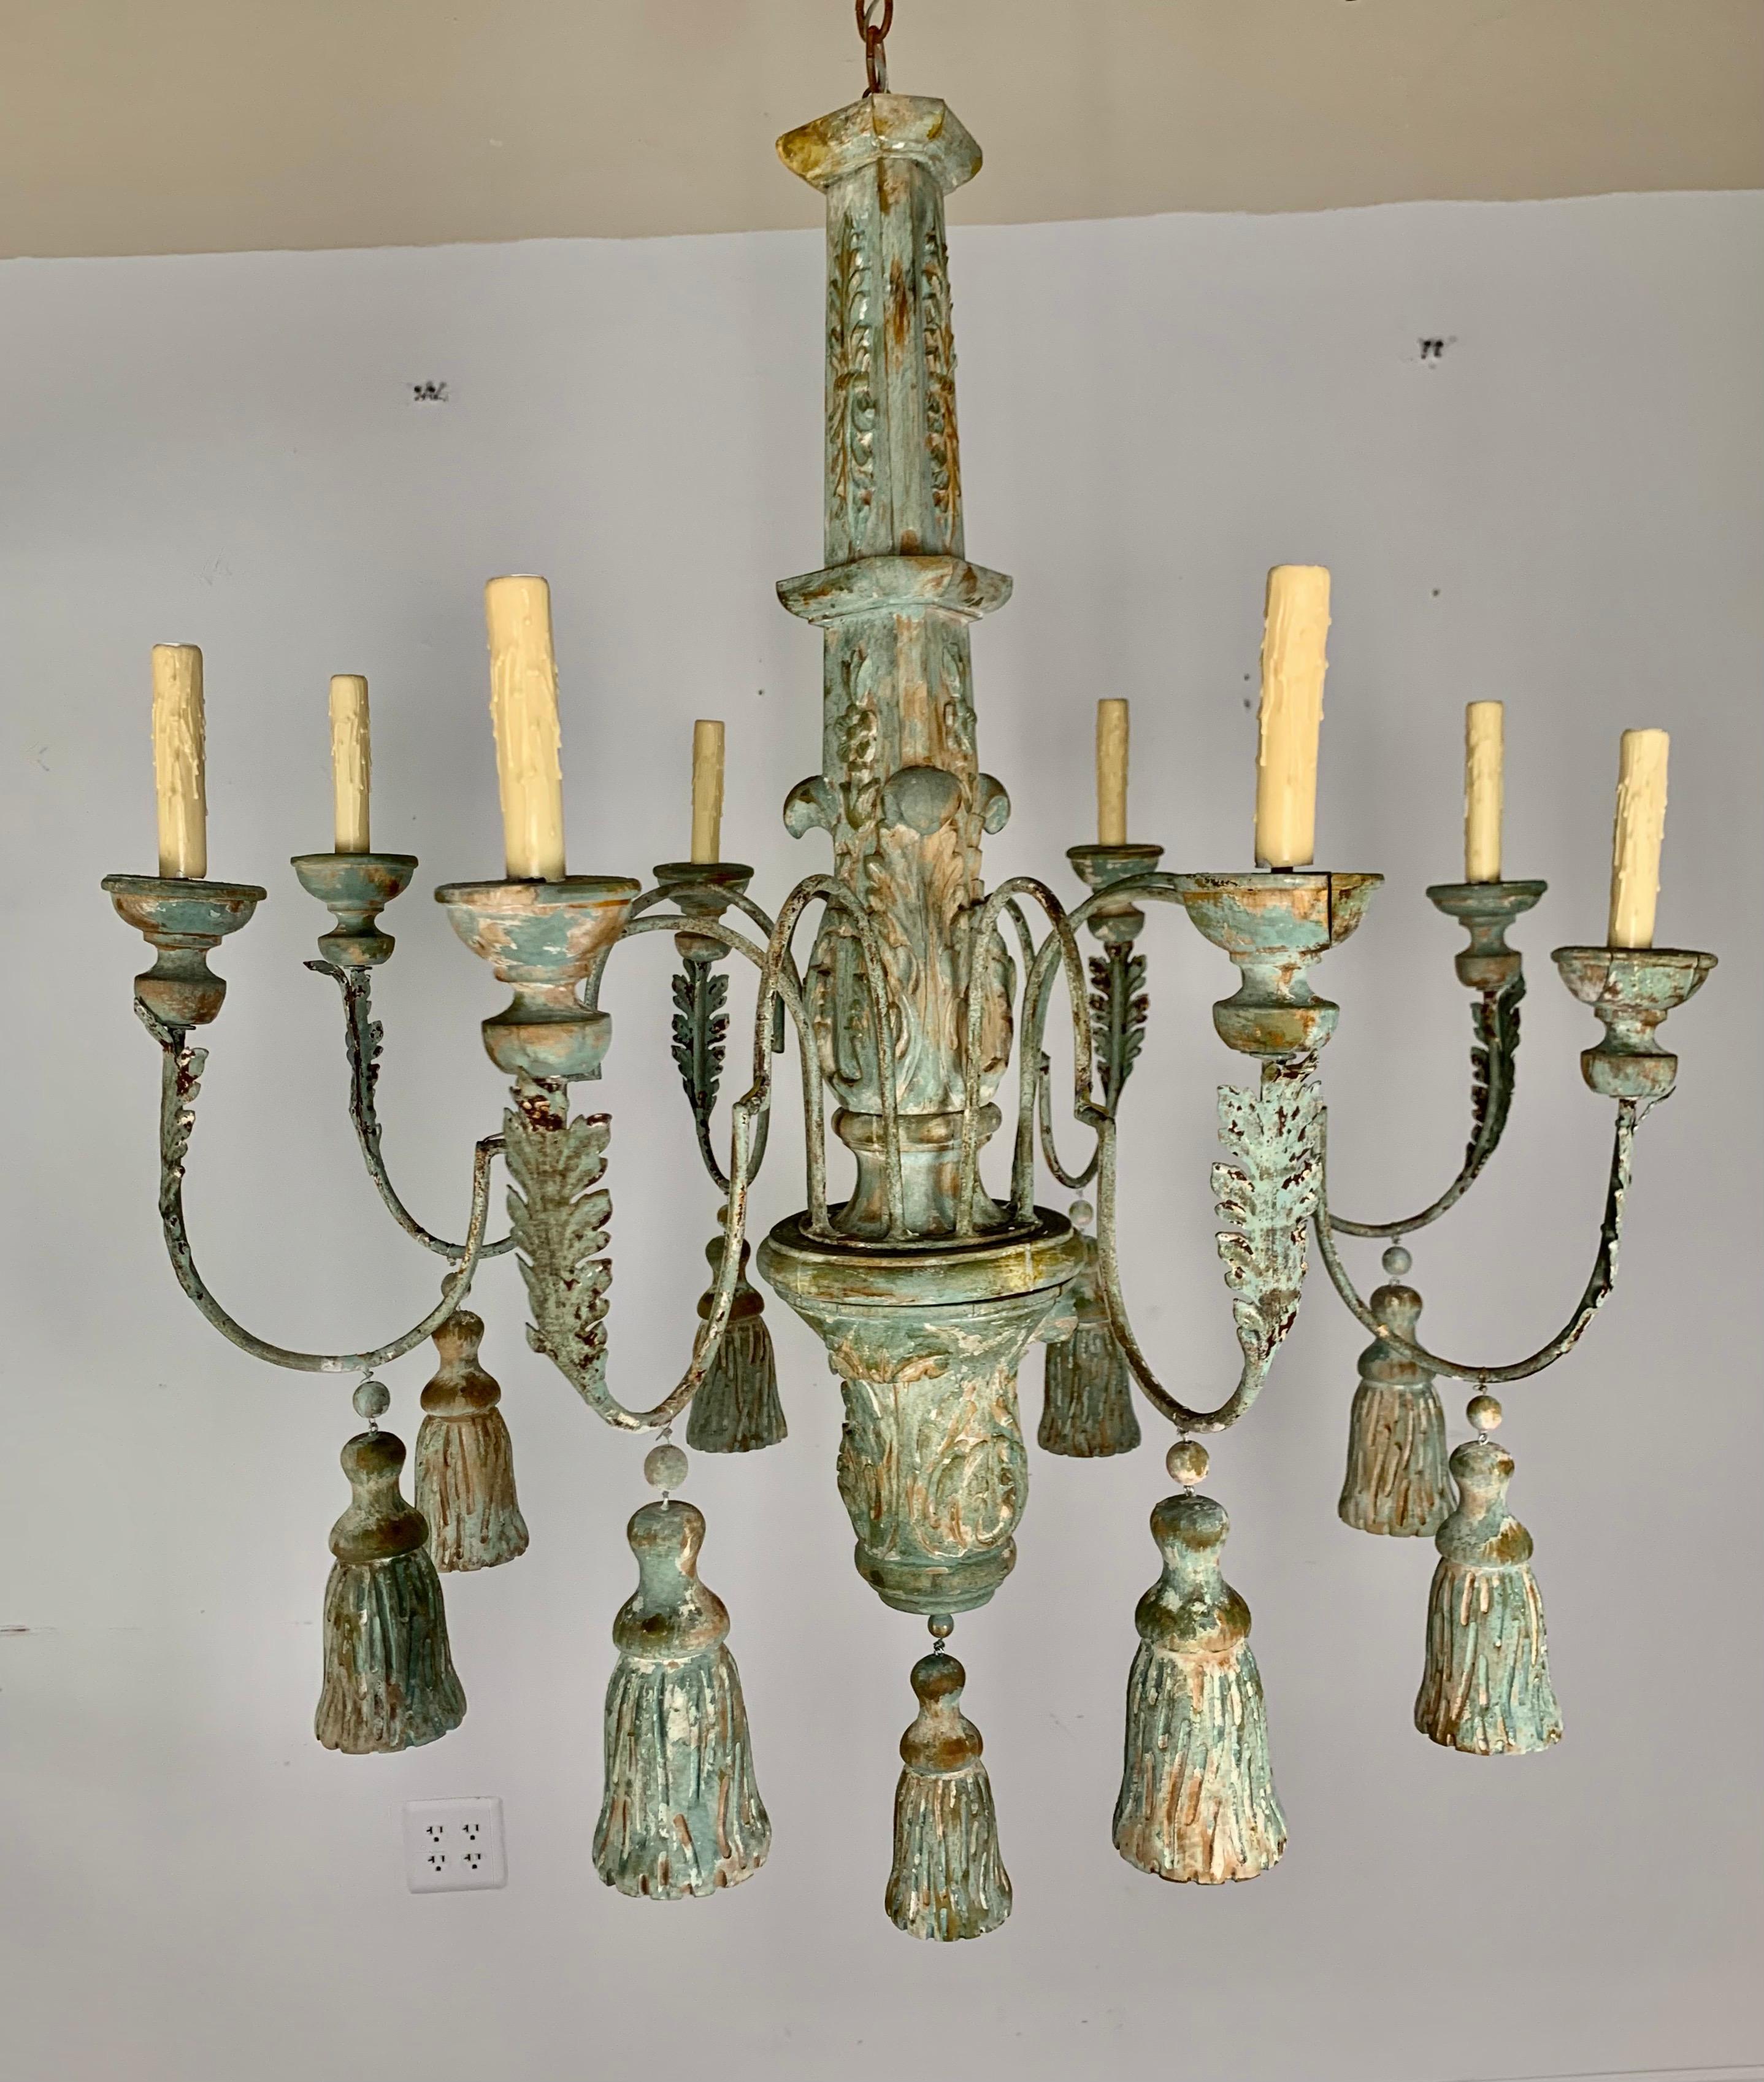 Ten light wood & iron painted chandelier with hand carved tassels hanging throughout. The fixture is newly rewired and includes chain and canopy. The chandelier has a beautiful worn painted finish that shows the wood underneath.